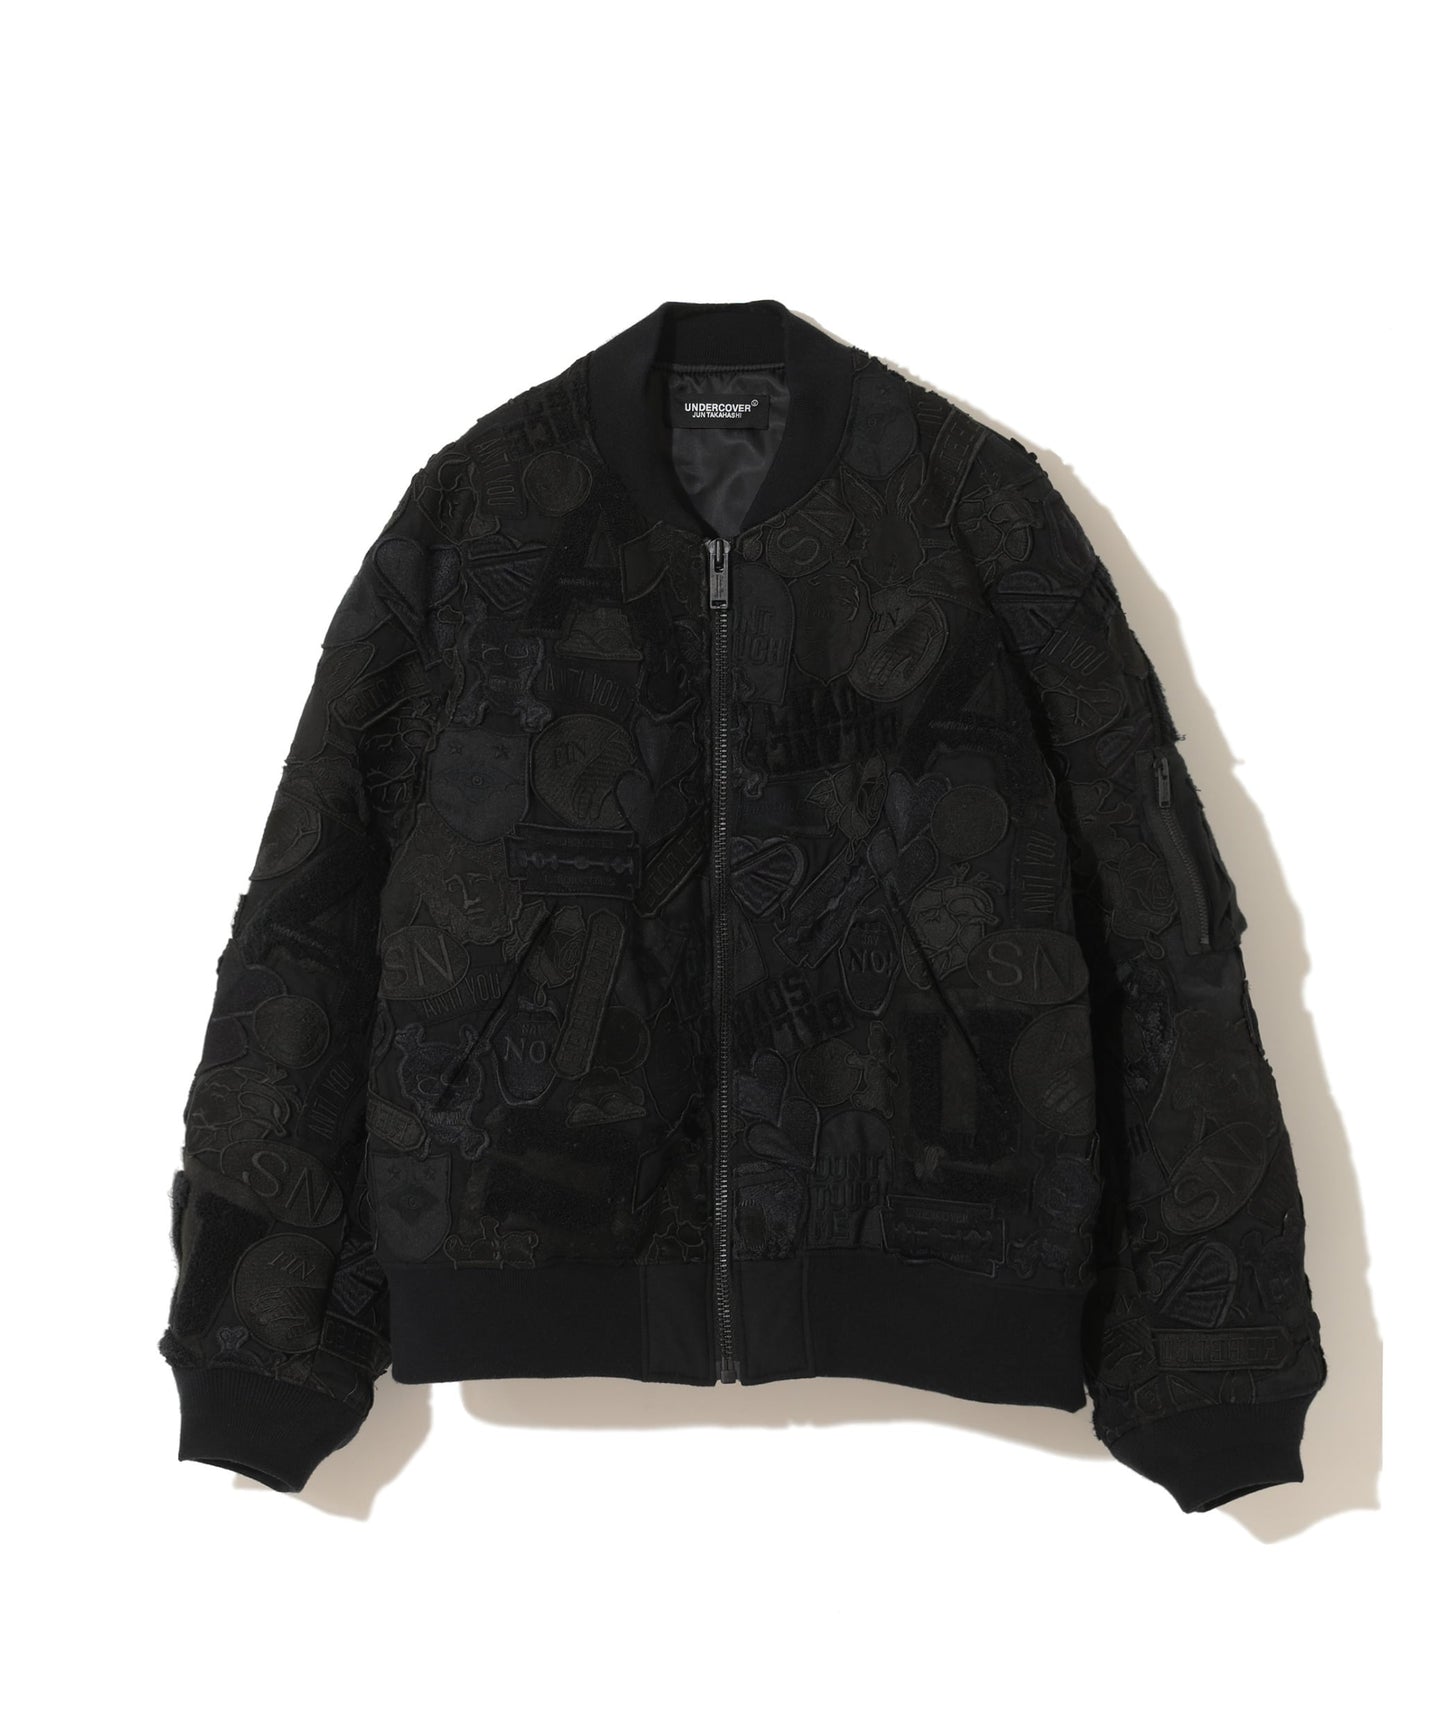 Undercover Black Patched Bomber Jacket